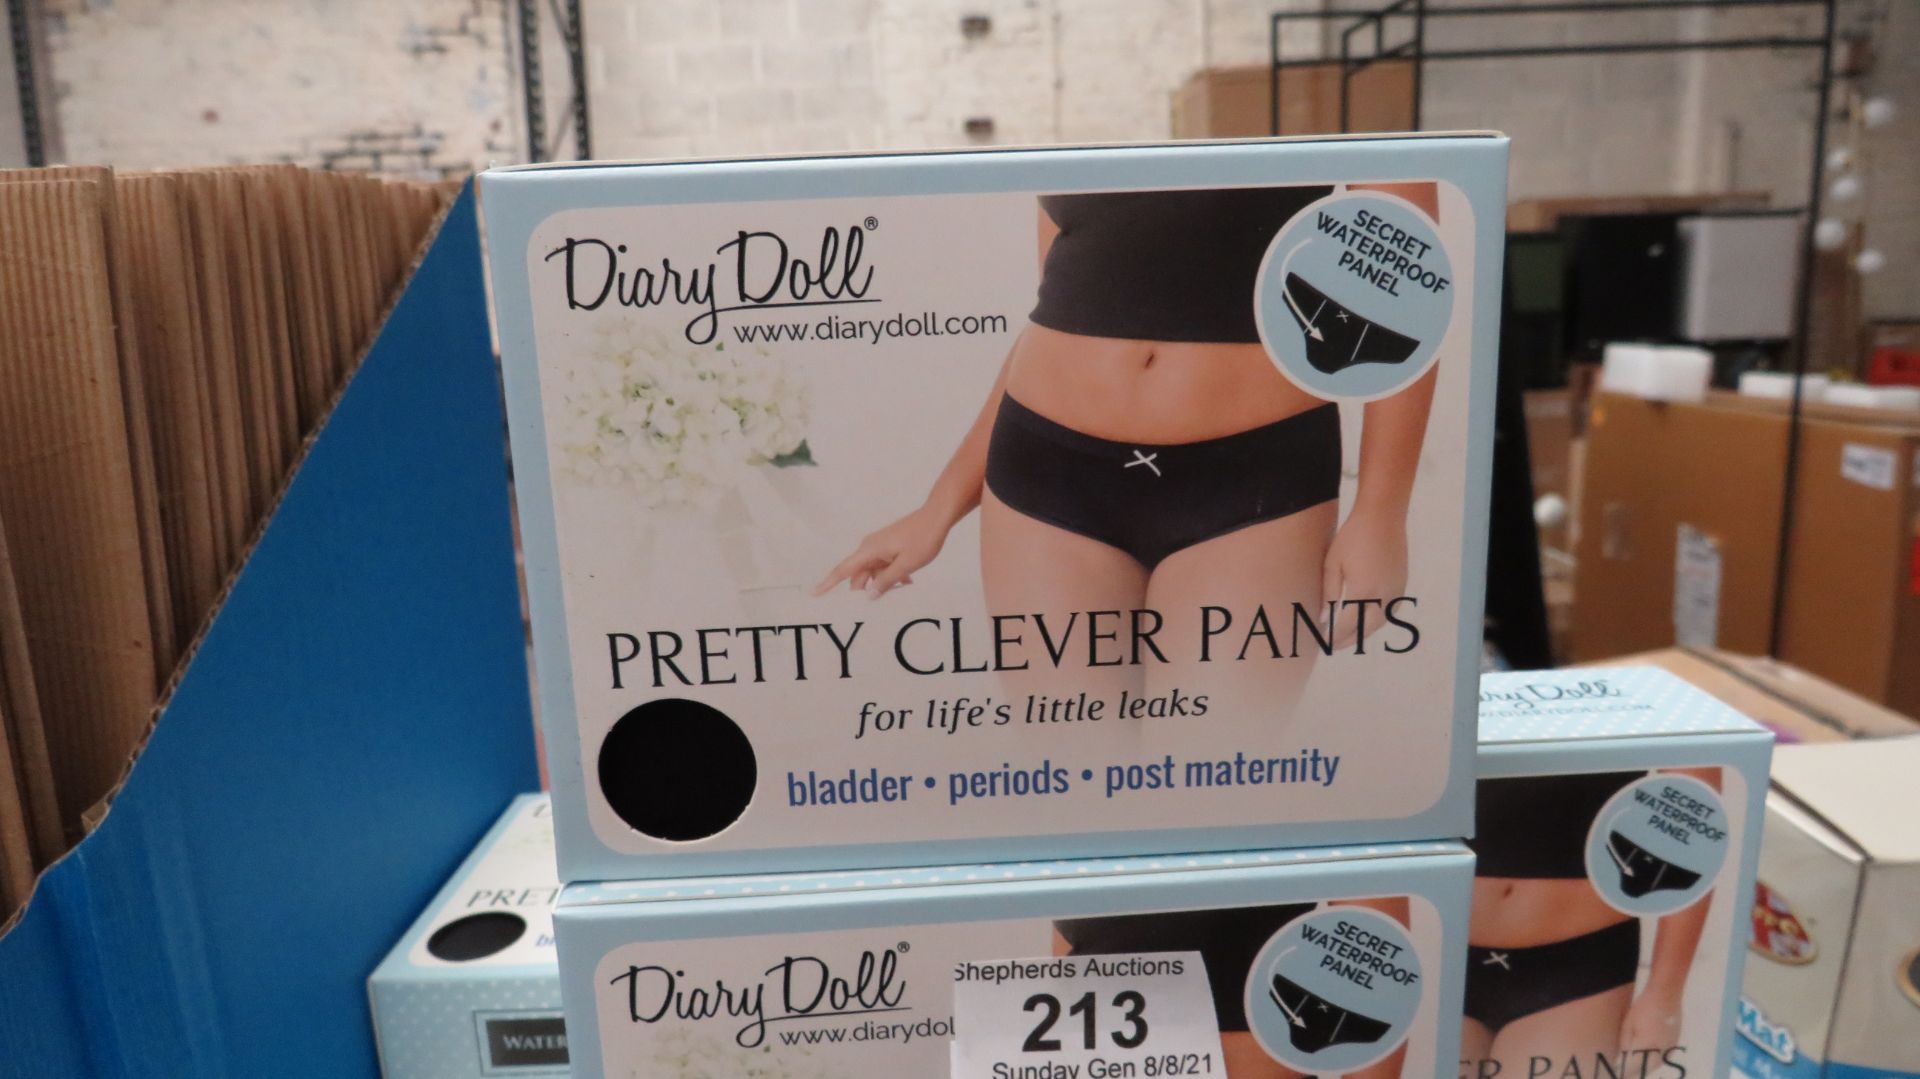 10x Dairy Doll Pretty Clever Pants (WaterProof) - New & Boxed.